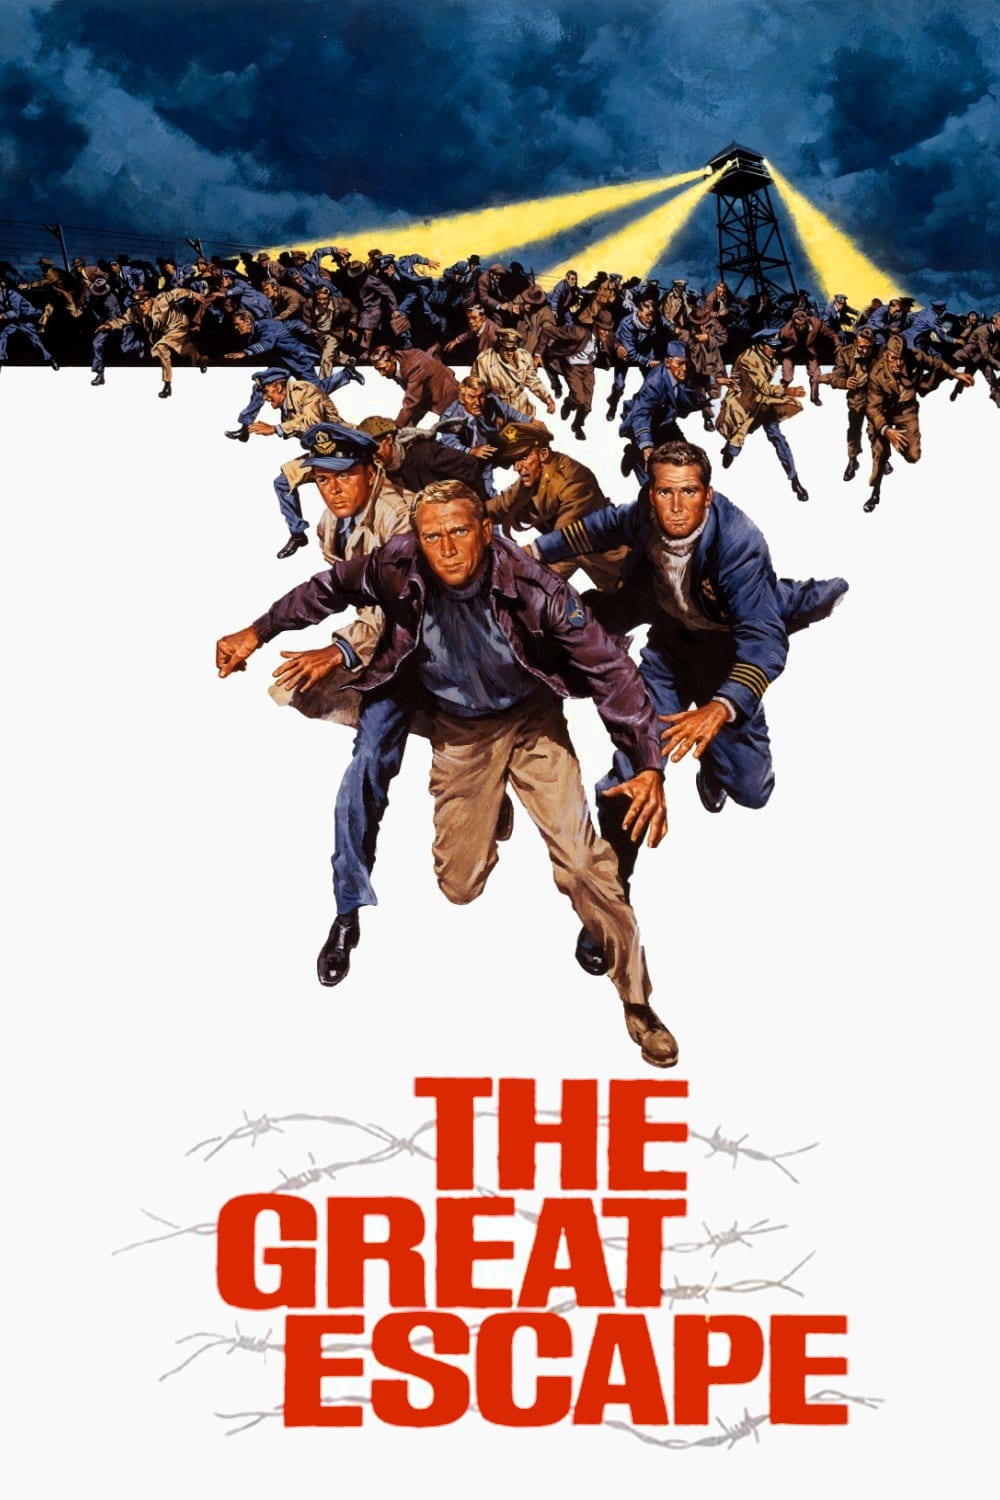 Poster for the movie "The Great Escape"